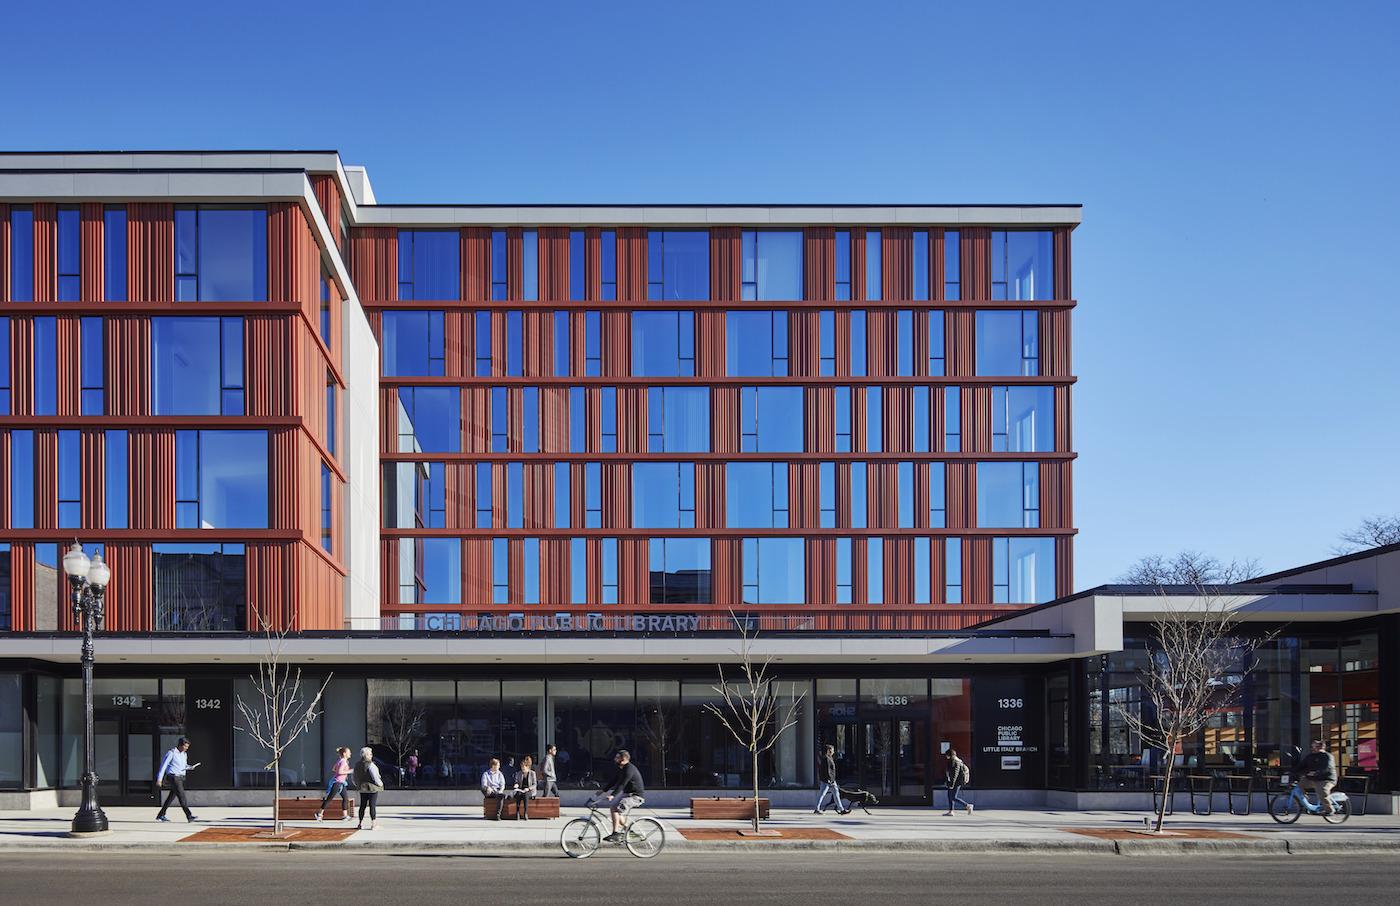 The Taylor Street Apartments and Little Italy library branch in Chicago, designed by SOM's Brian Lee. Photo: Tom Harris